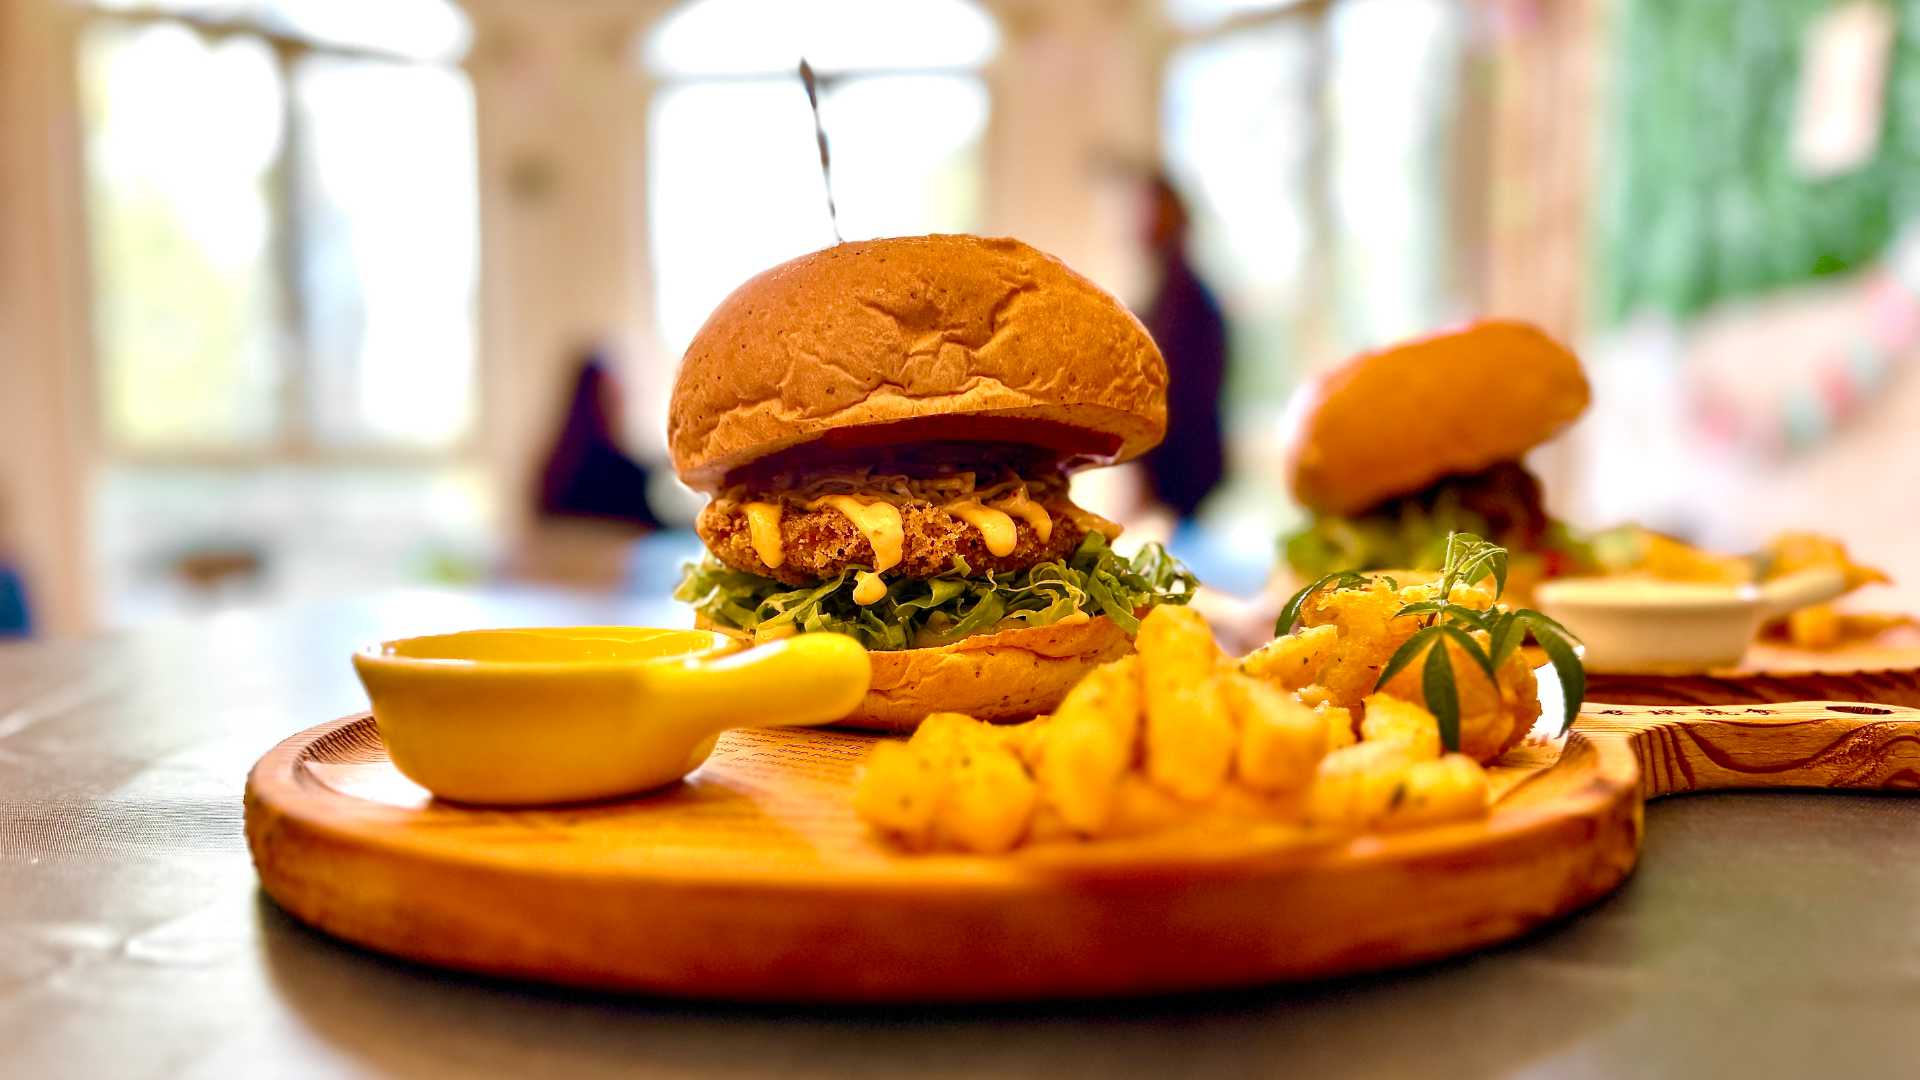 Close-up of a vegetable burger served on a round wooden tray with a side of potato fries.